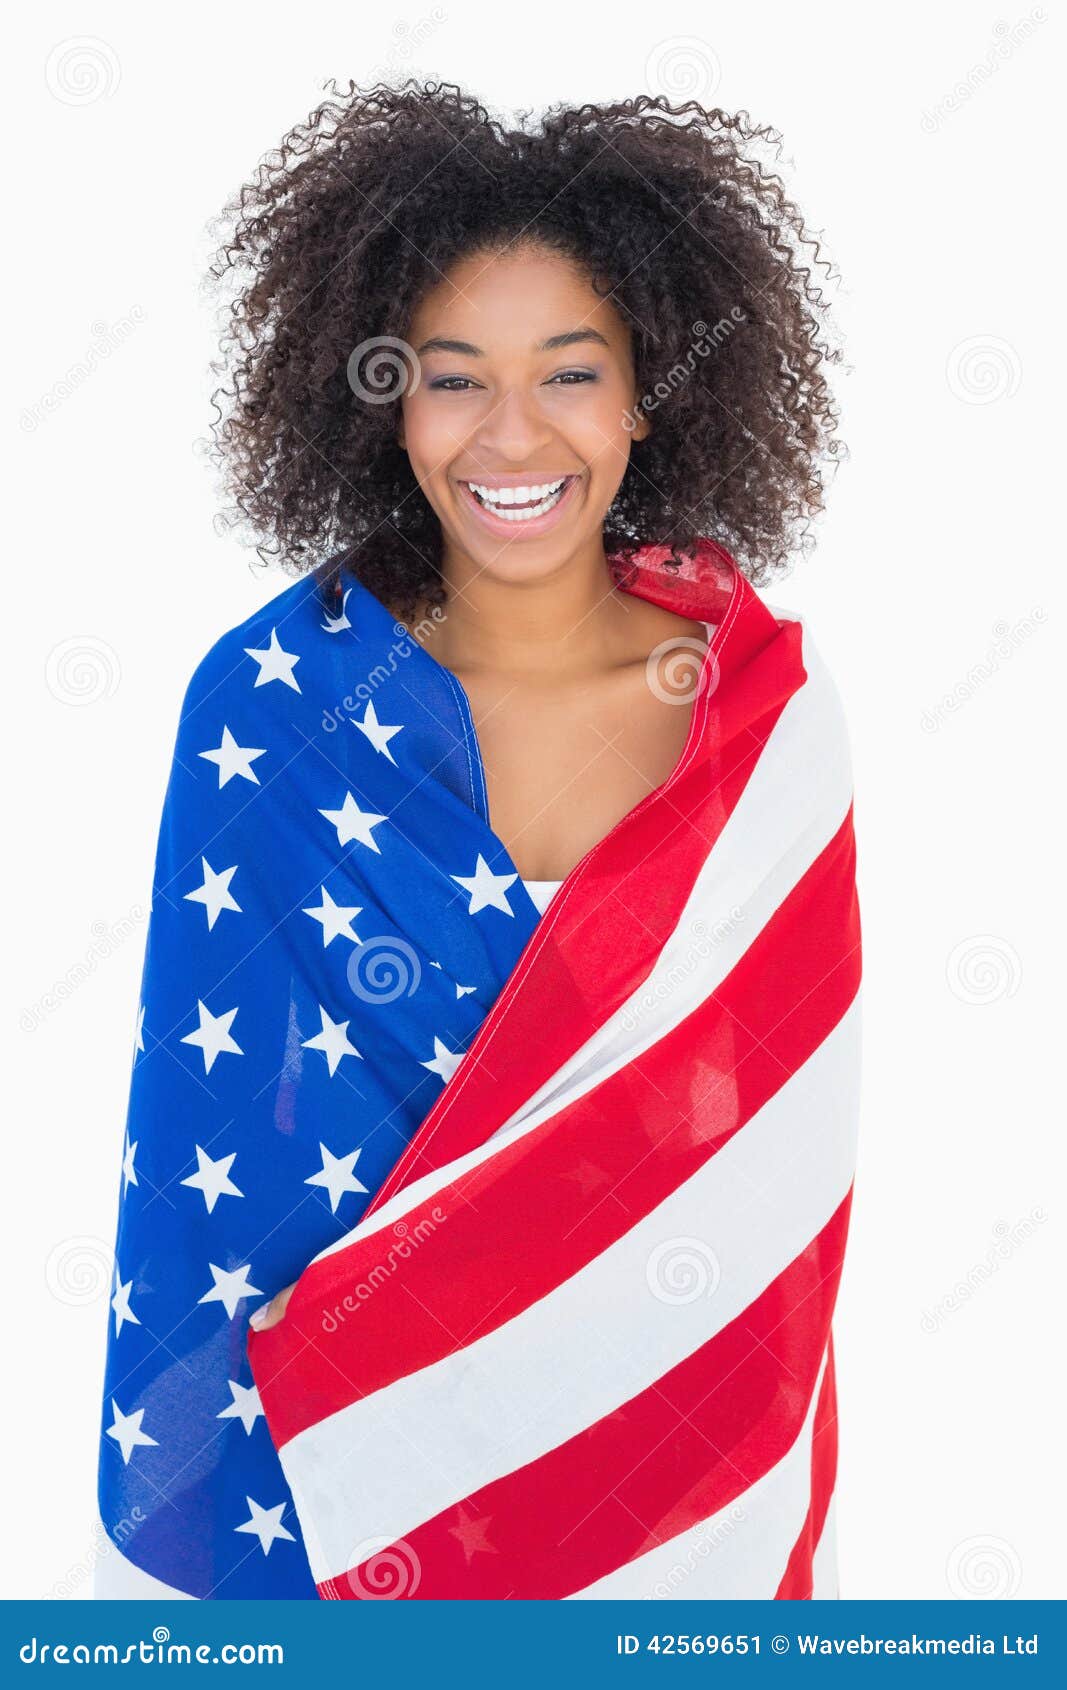 Pretty Girl Wrapped in American Flag Smiling at Camera Stock Image ...